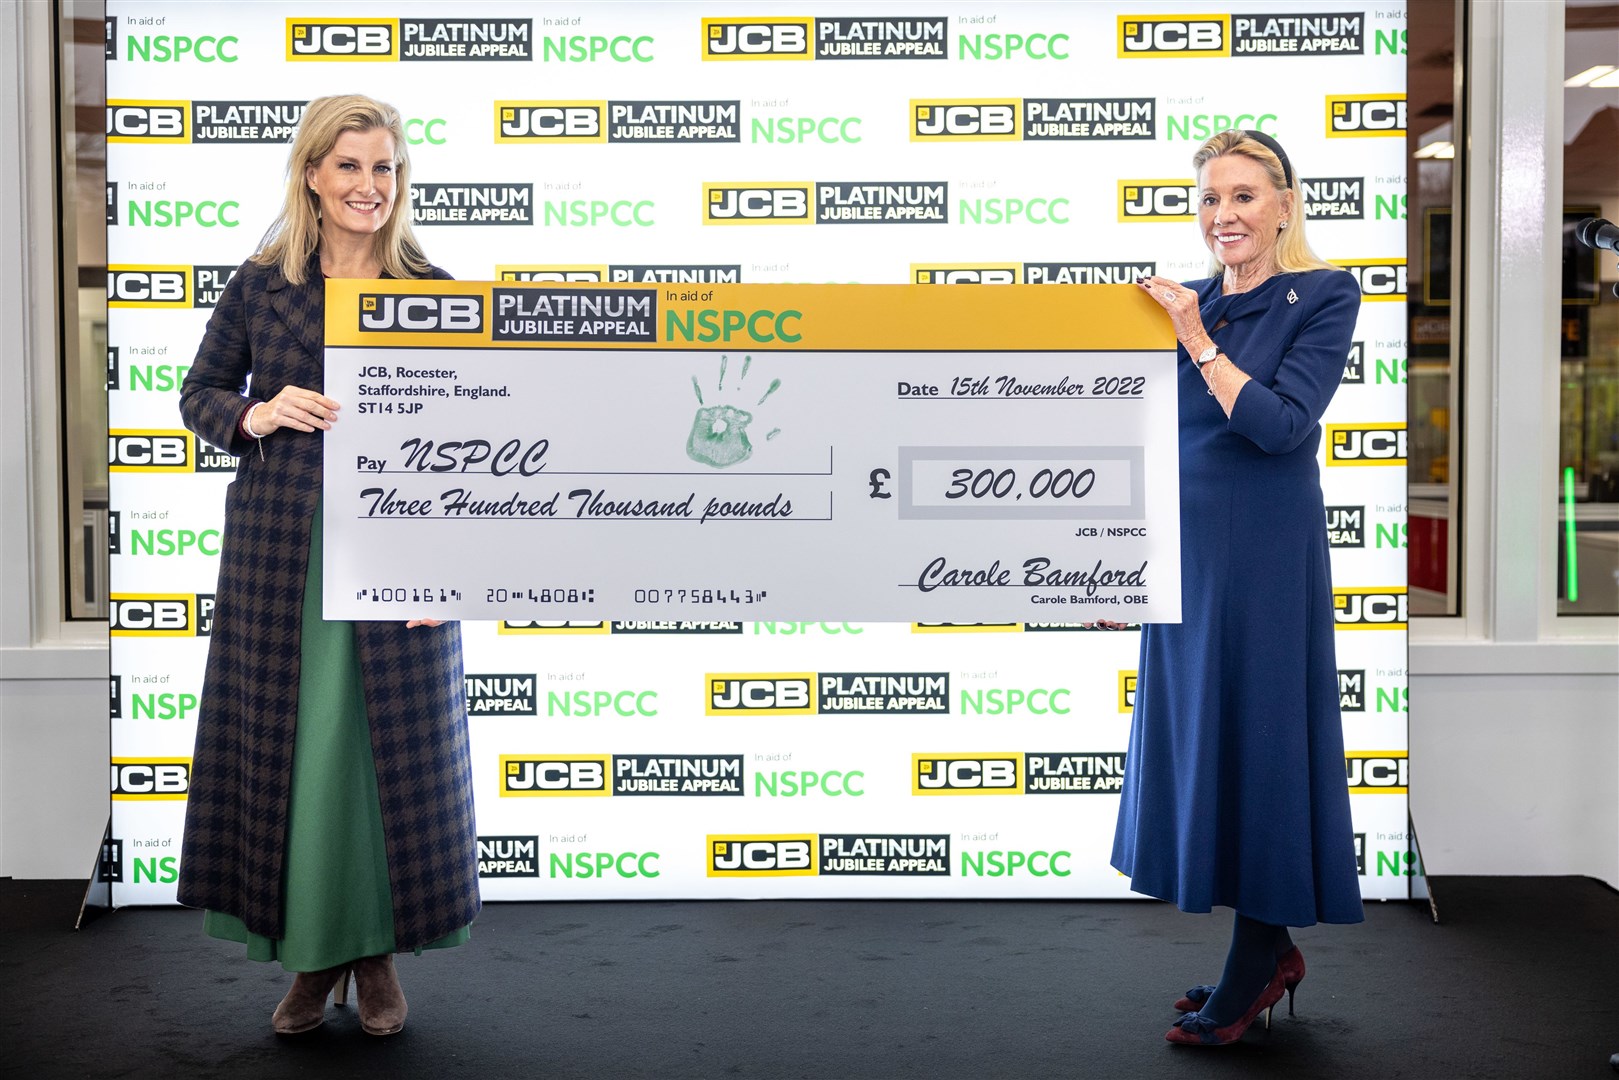 The Countess of Wessex (left) receives a £300,000 cheque for the children’s charity NSPCC from Carole Bamford (James Speakman/PA)